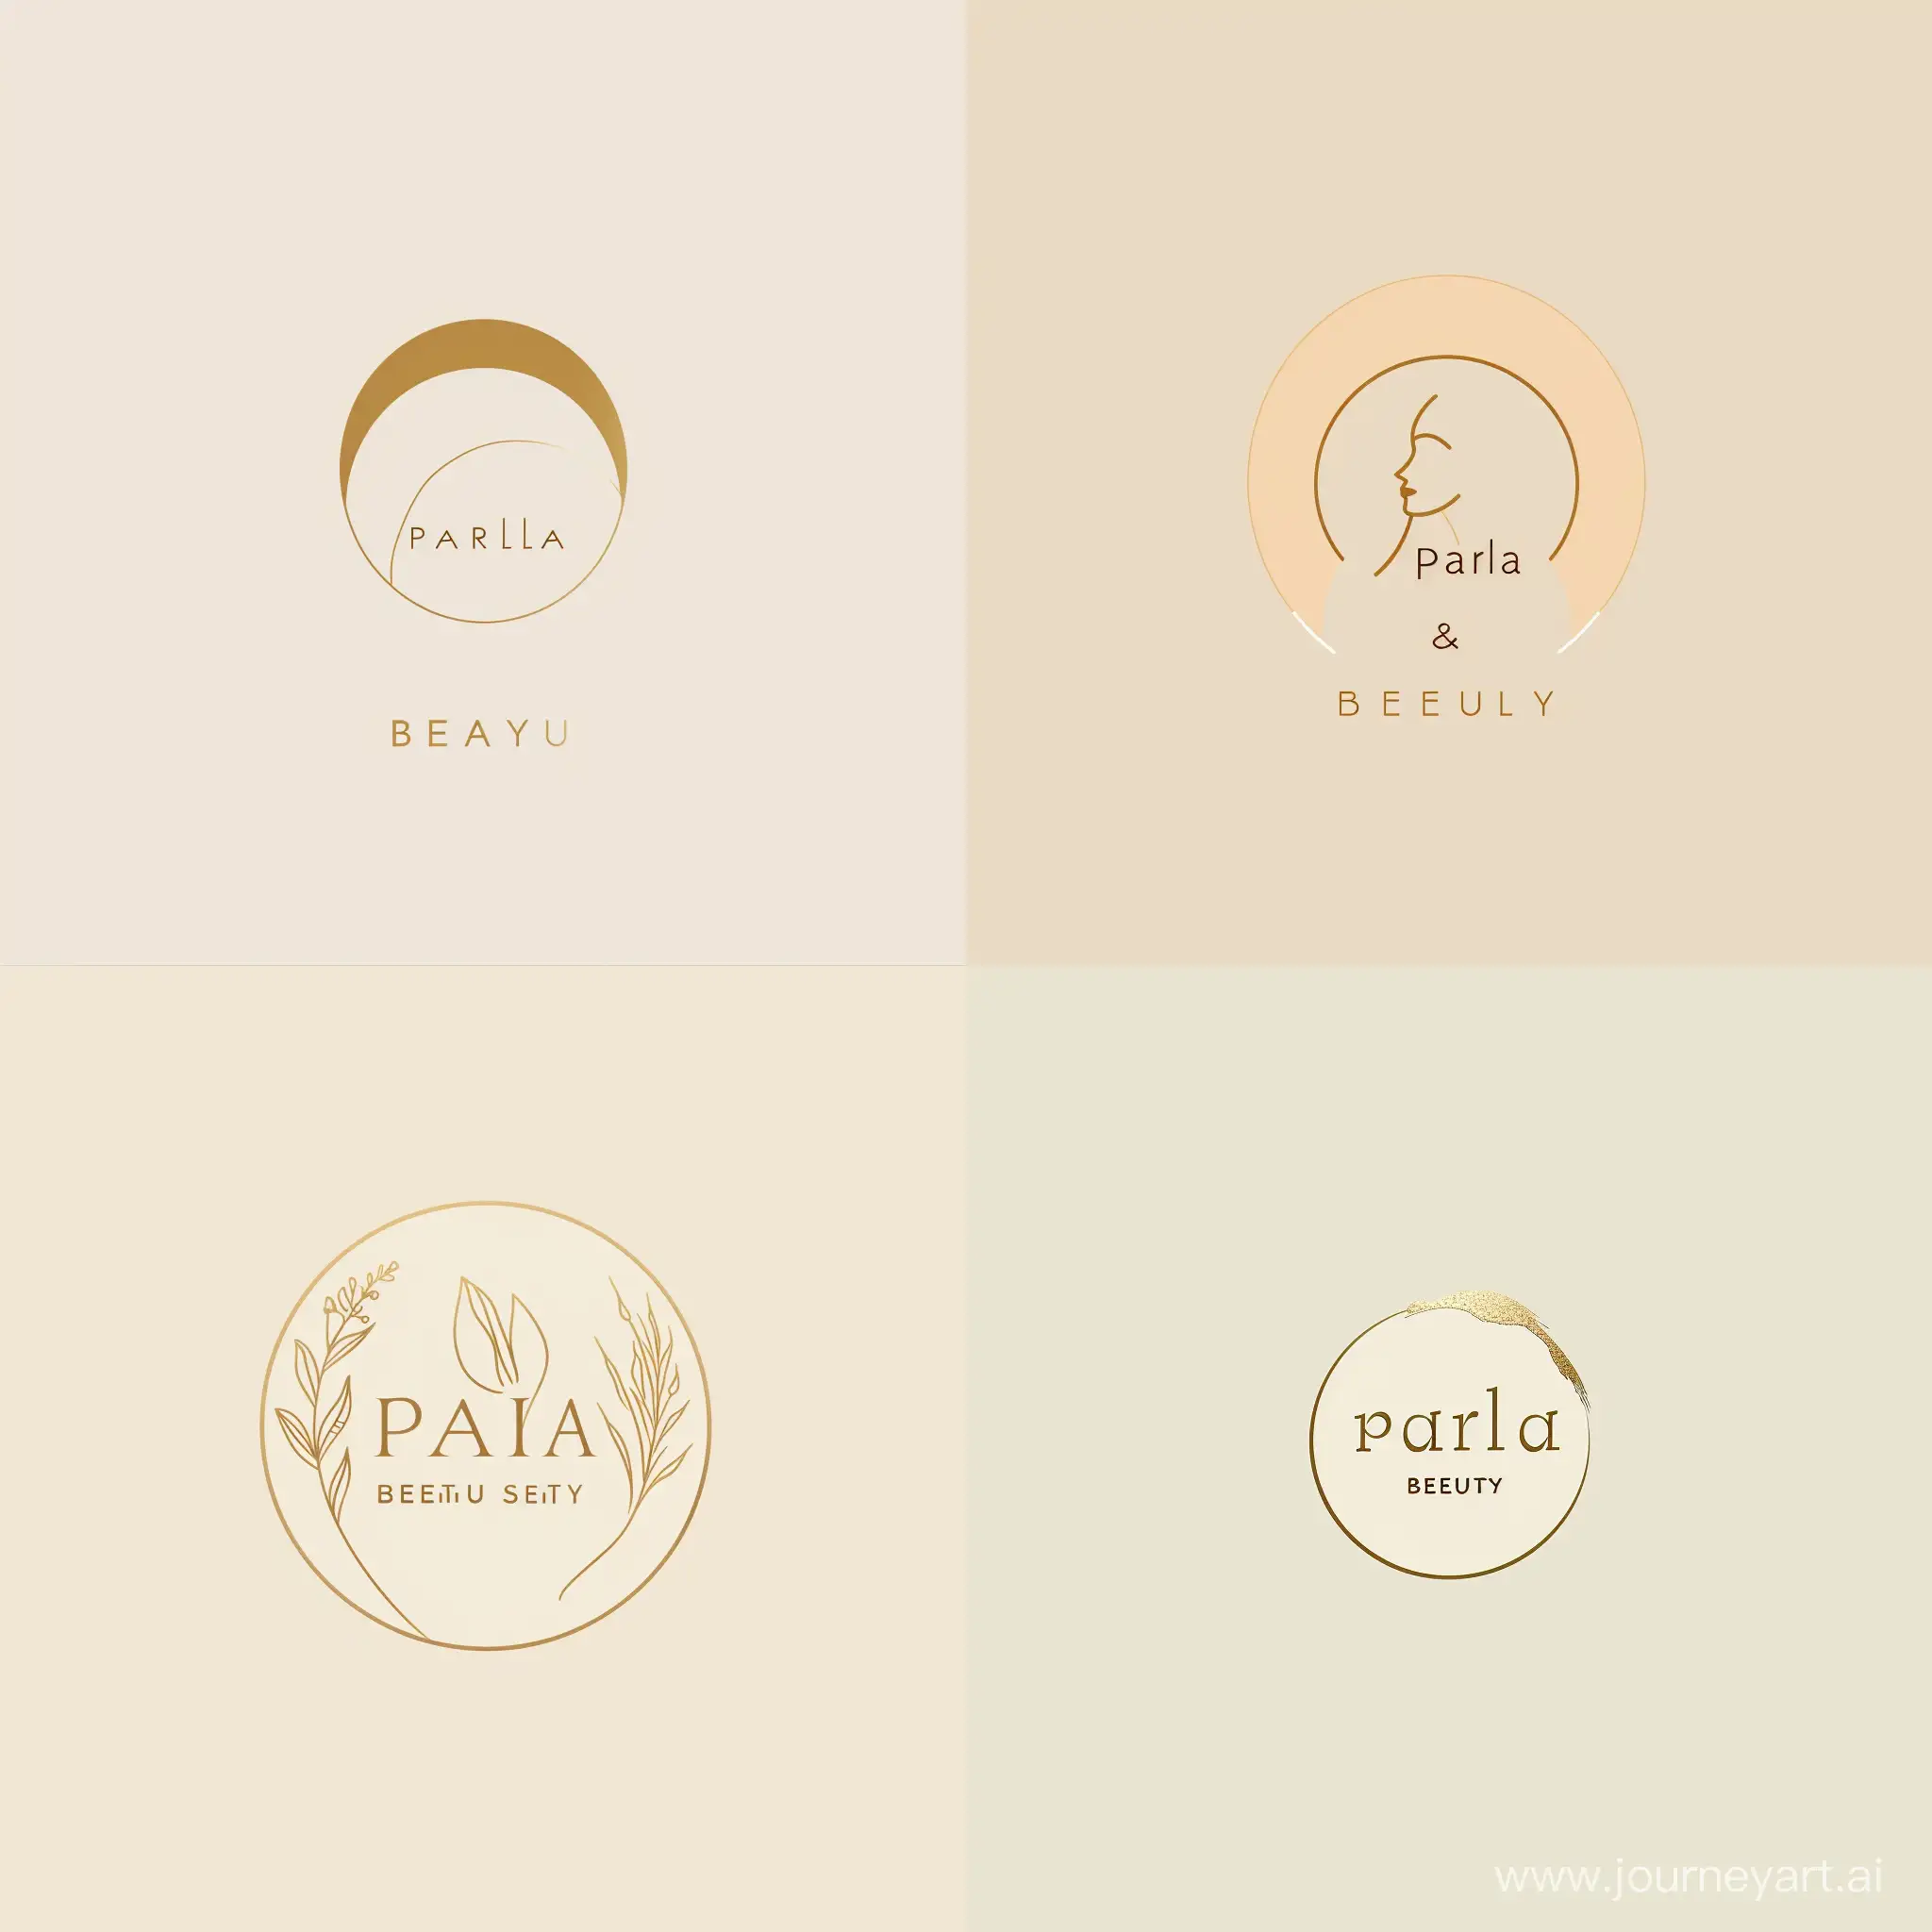 I need a logo for my beauty salon. Its name is 'Parla'. Use both 'parla' & 'beauty' words in logo. I prefer the rounded shape logo. I should be in minimalist and simple style. If you wanna to use color, I'd prefer cream and gold.